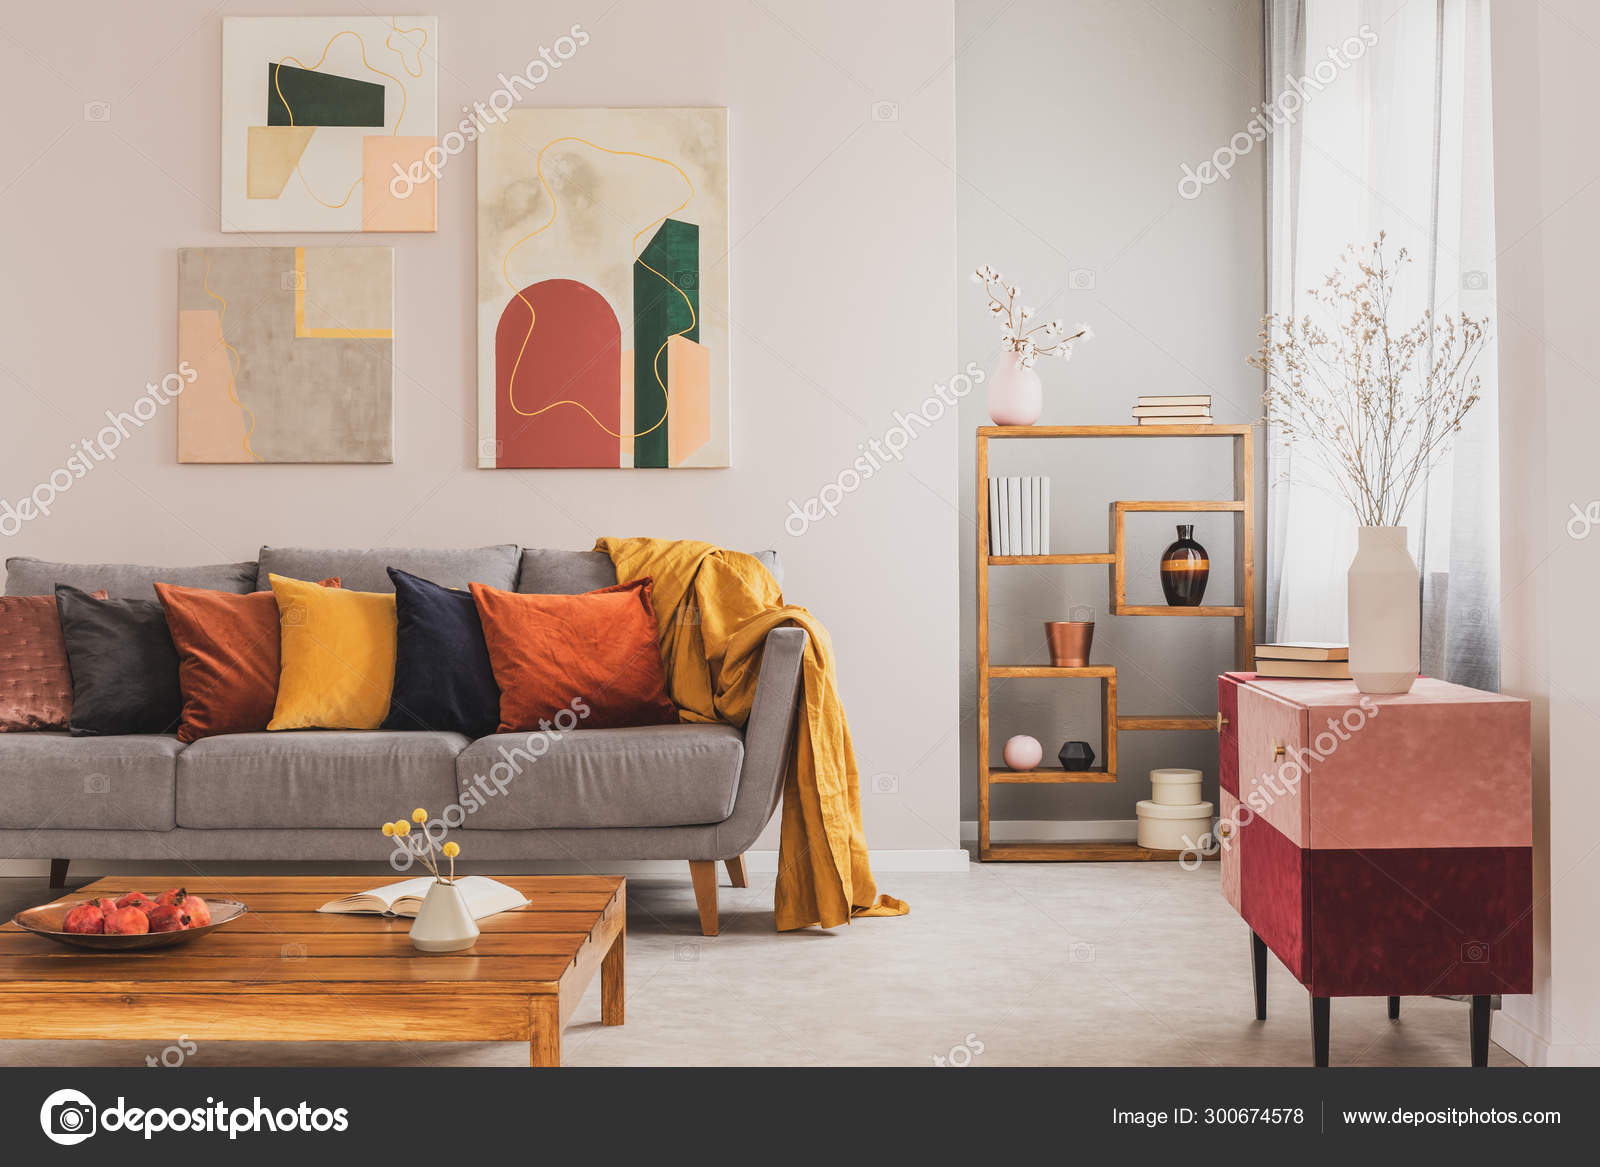 grey couch with orange pillows